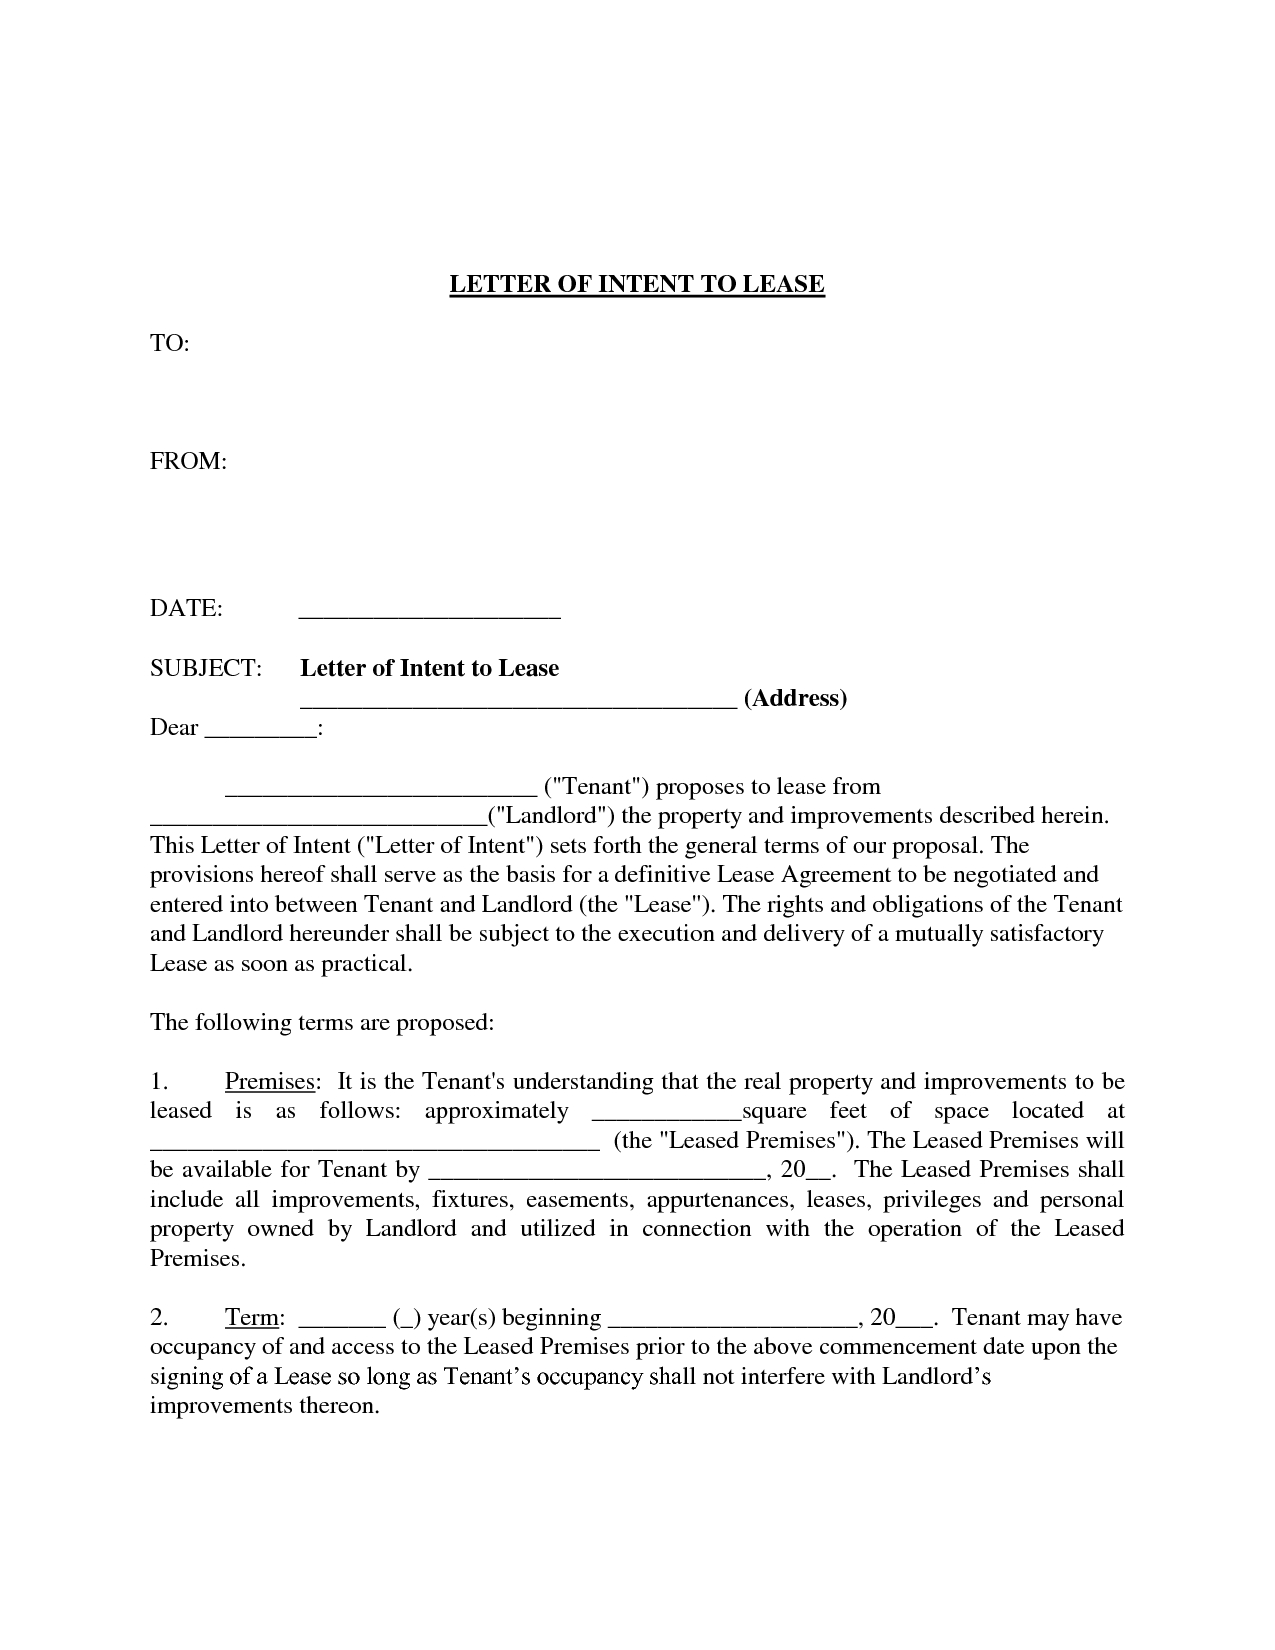 Letter Of Intent to Lease Commercial Property Template - Letter Intent format Gplusnick Yvsutt0s Merciale Sample